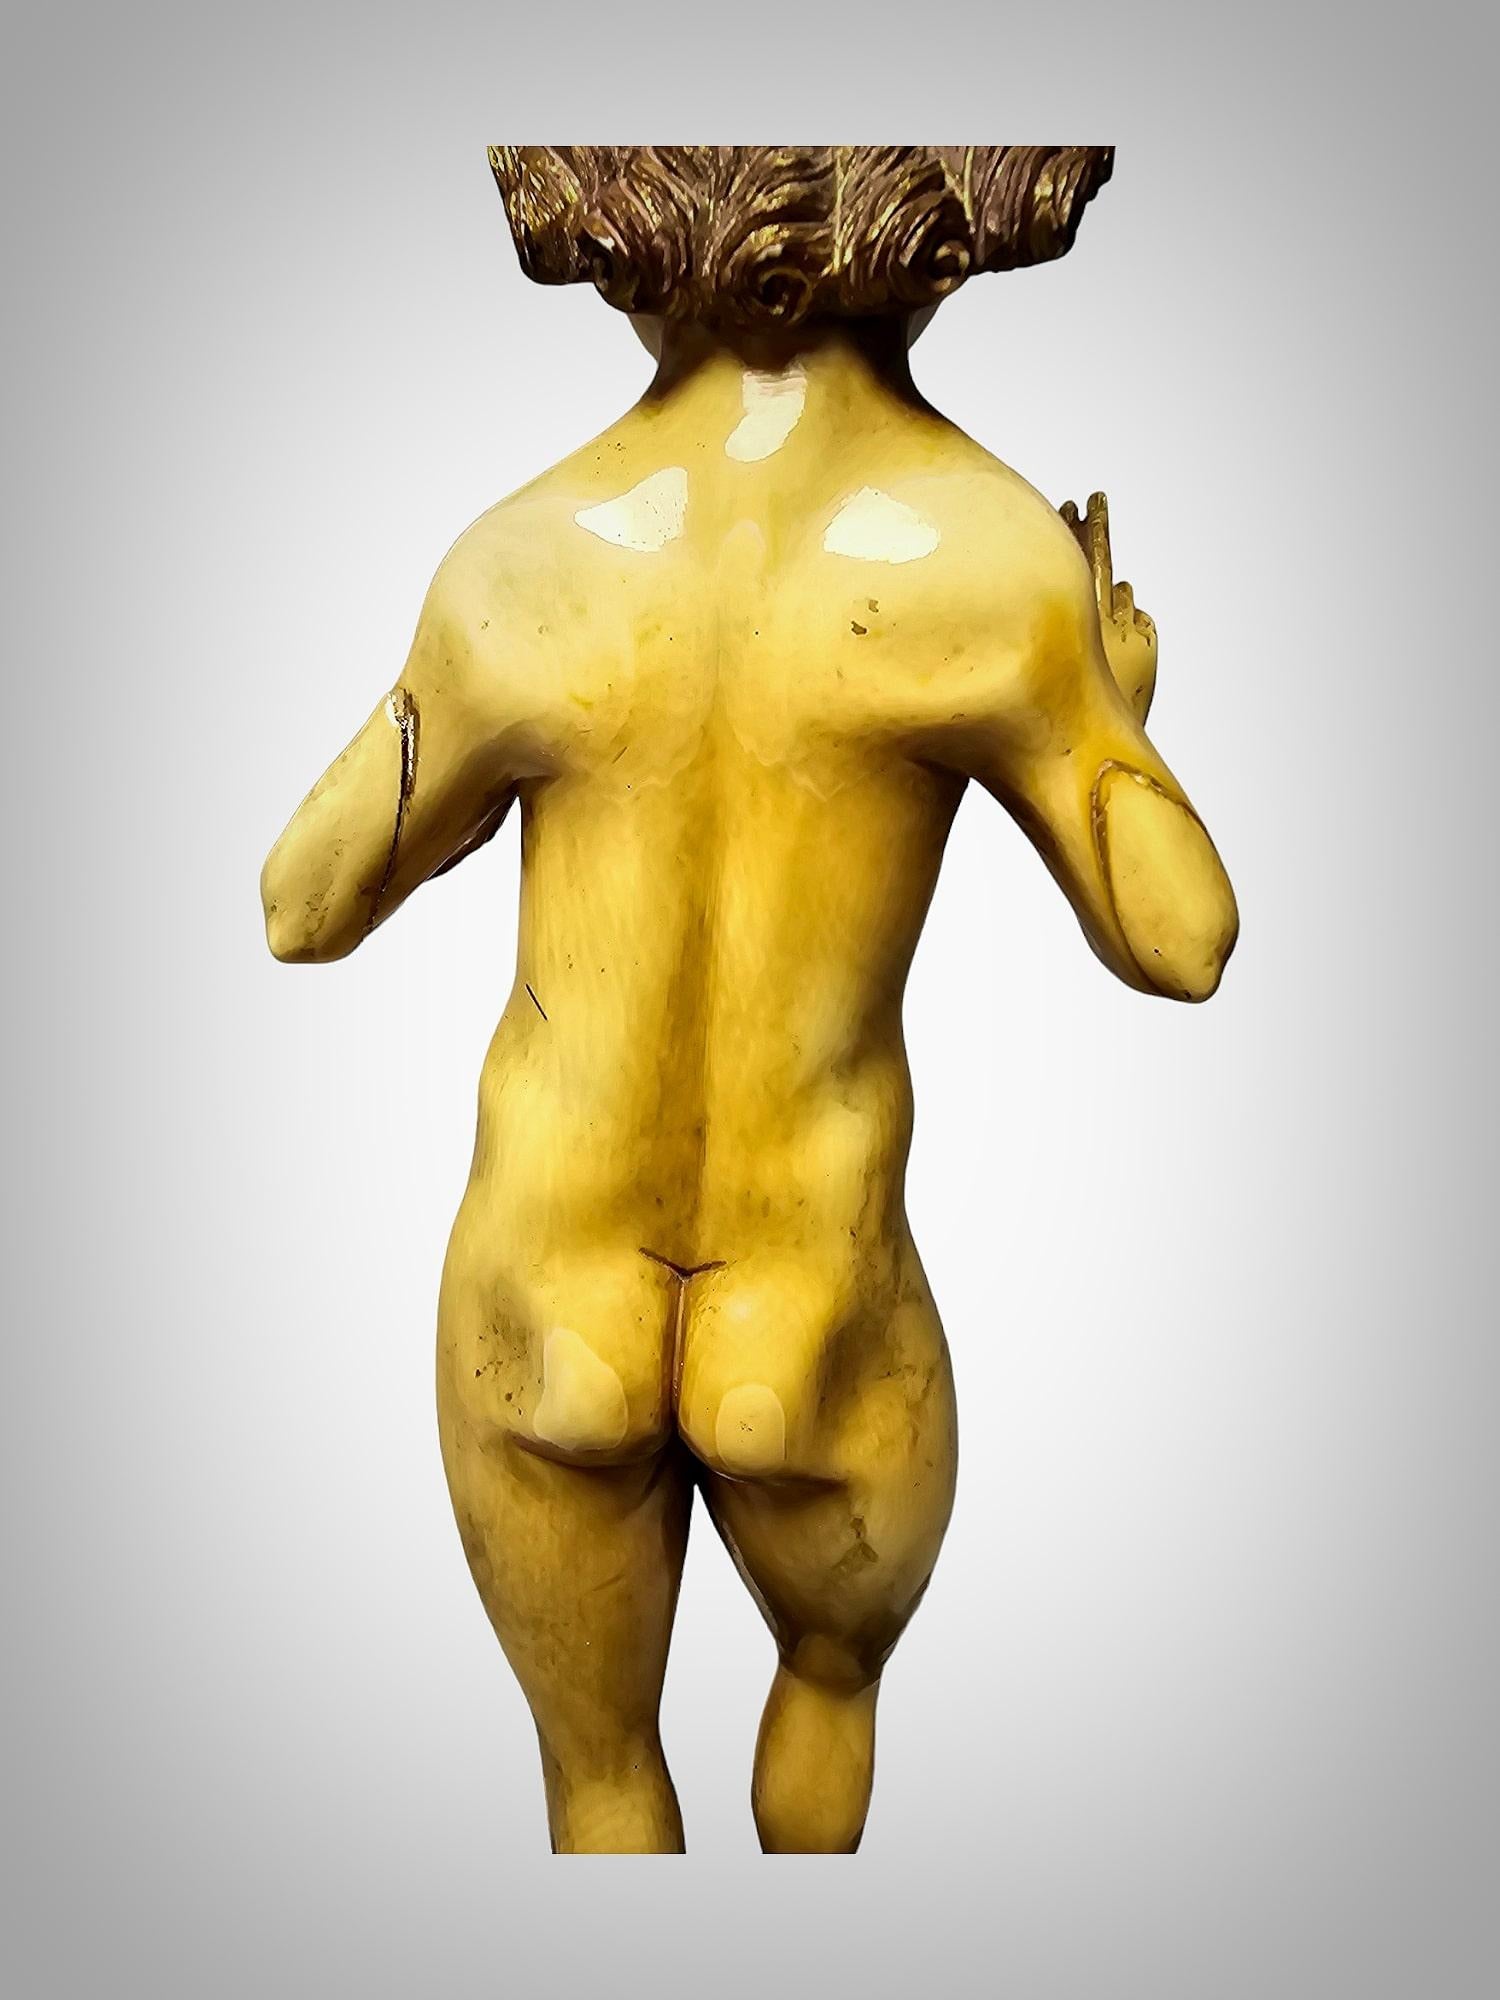 Sculpture of the Infant Jesus as Salvator Mundi - School of Mechelen, 15th-16th  For Sale 3